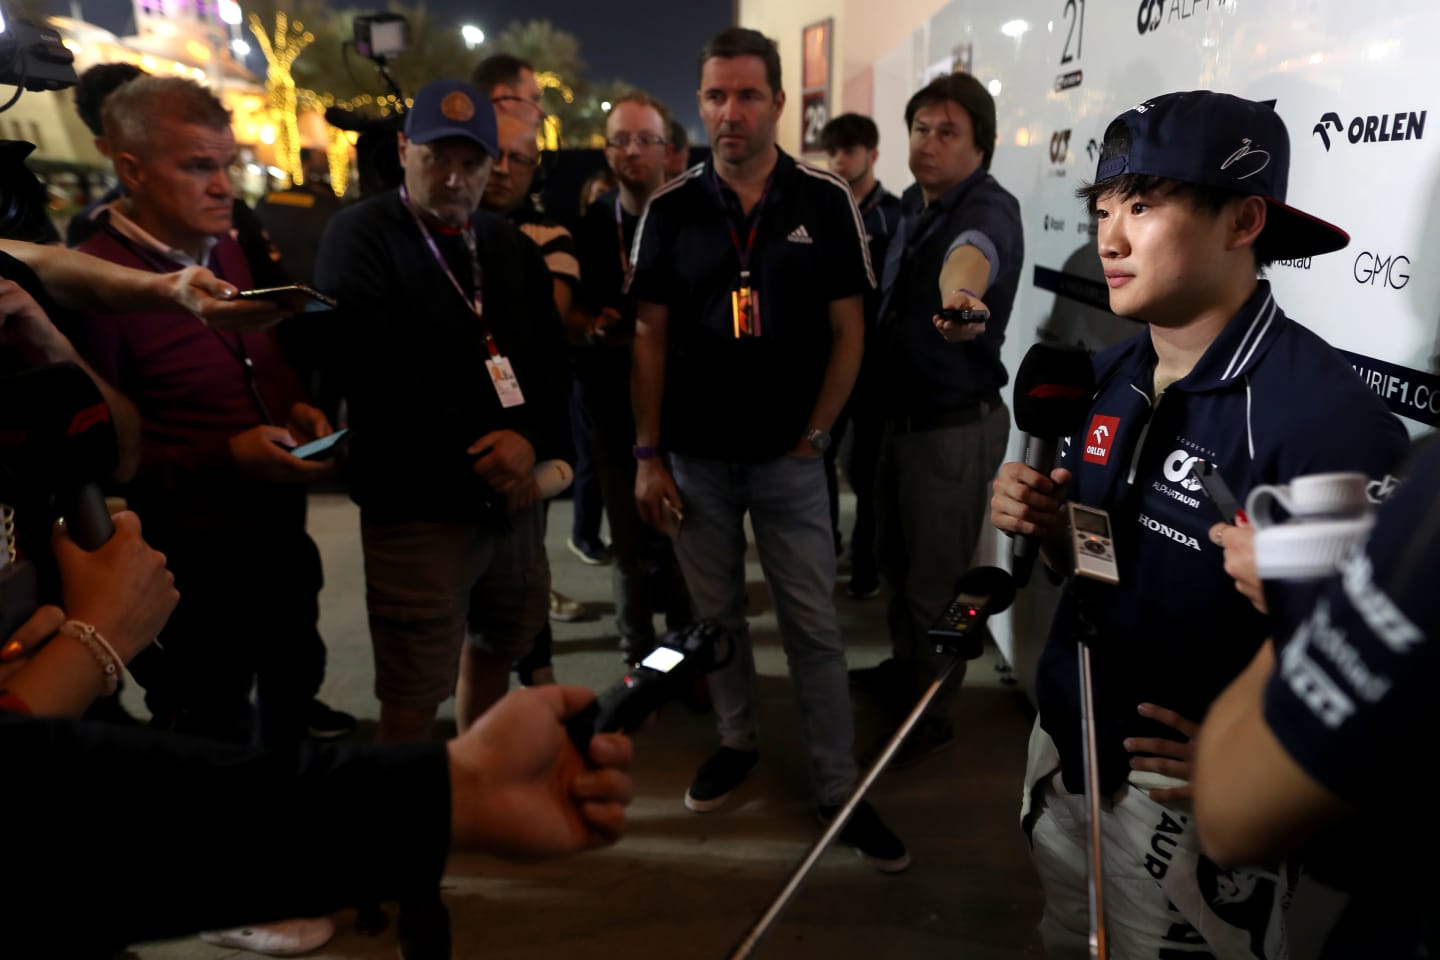 BAHRAIN, BAHRAIN - MARCH 03: Yuki Tsunoda of Japan and Scuderia AlphaTauri talks to the media in the Paddock after practice ahead of the F1 Grand Prix of Bahrain at Bahrain International Circuit on March 03, 2023 in Bahrain, Bahrain. (Photo by Peter Fox/Getty Images)